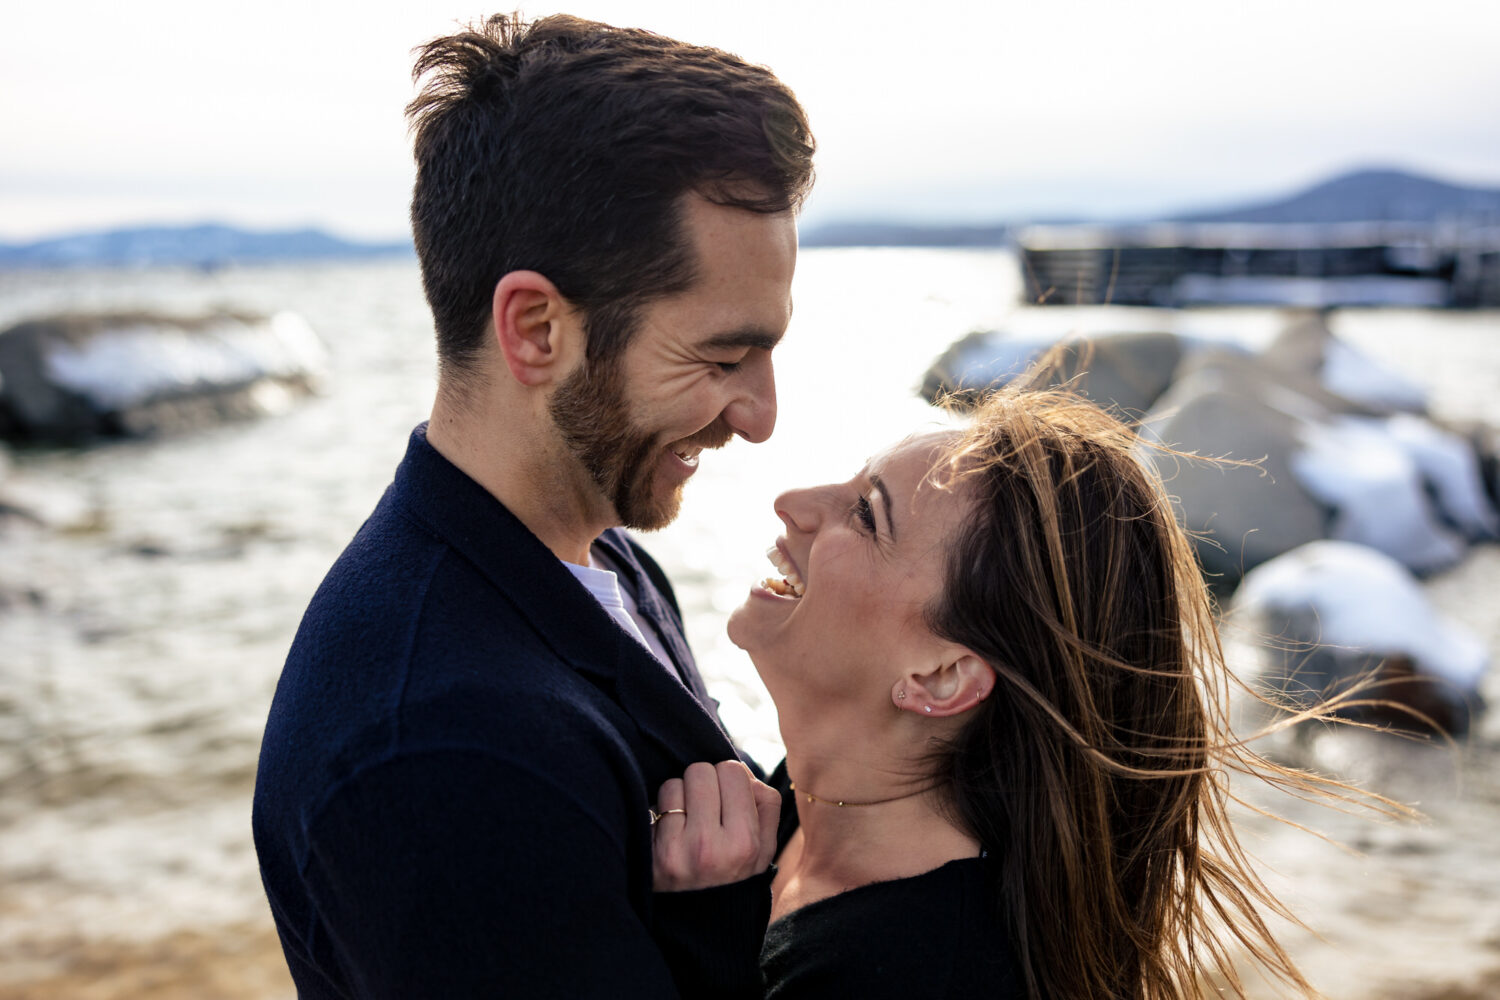 A candid moment captured by photographer Chris Werner during an engagement shoot in Lake Tahoe.